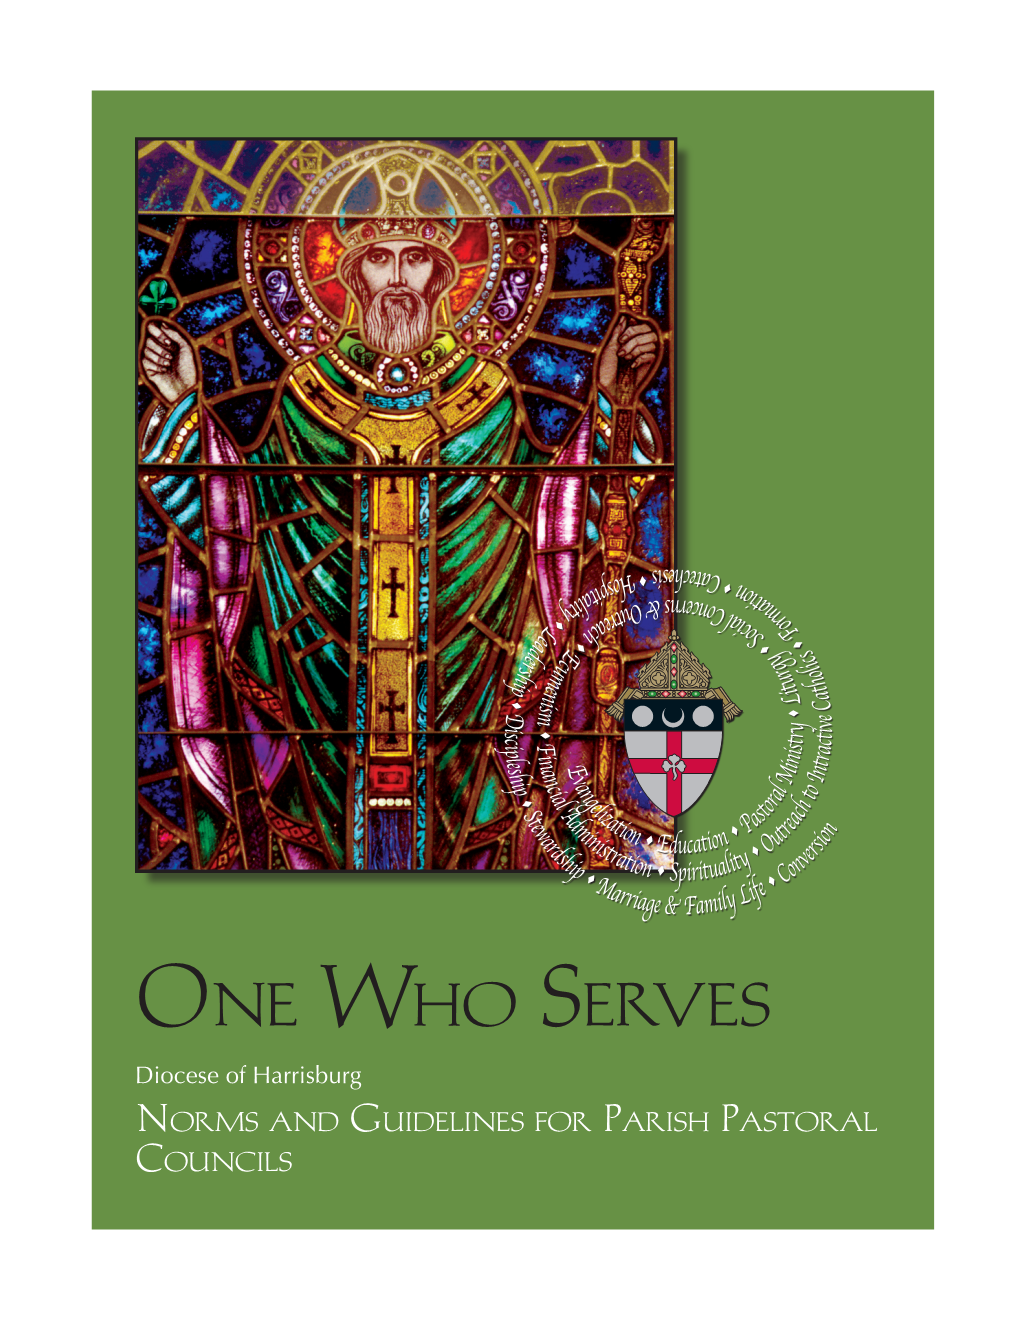 One Who Serves Diocese of Harrisburg Norms and Guidelines for Parish Pastoral Councils